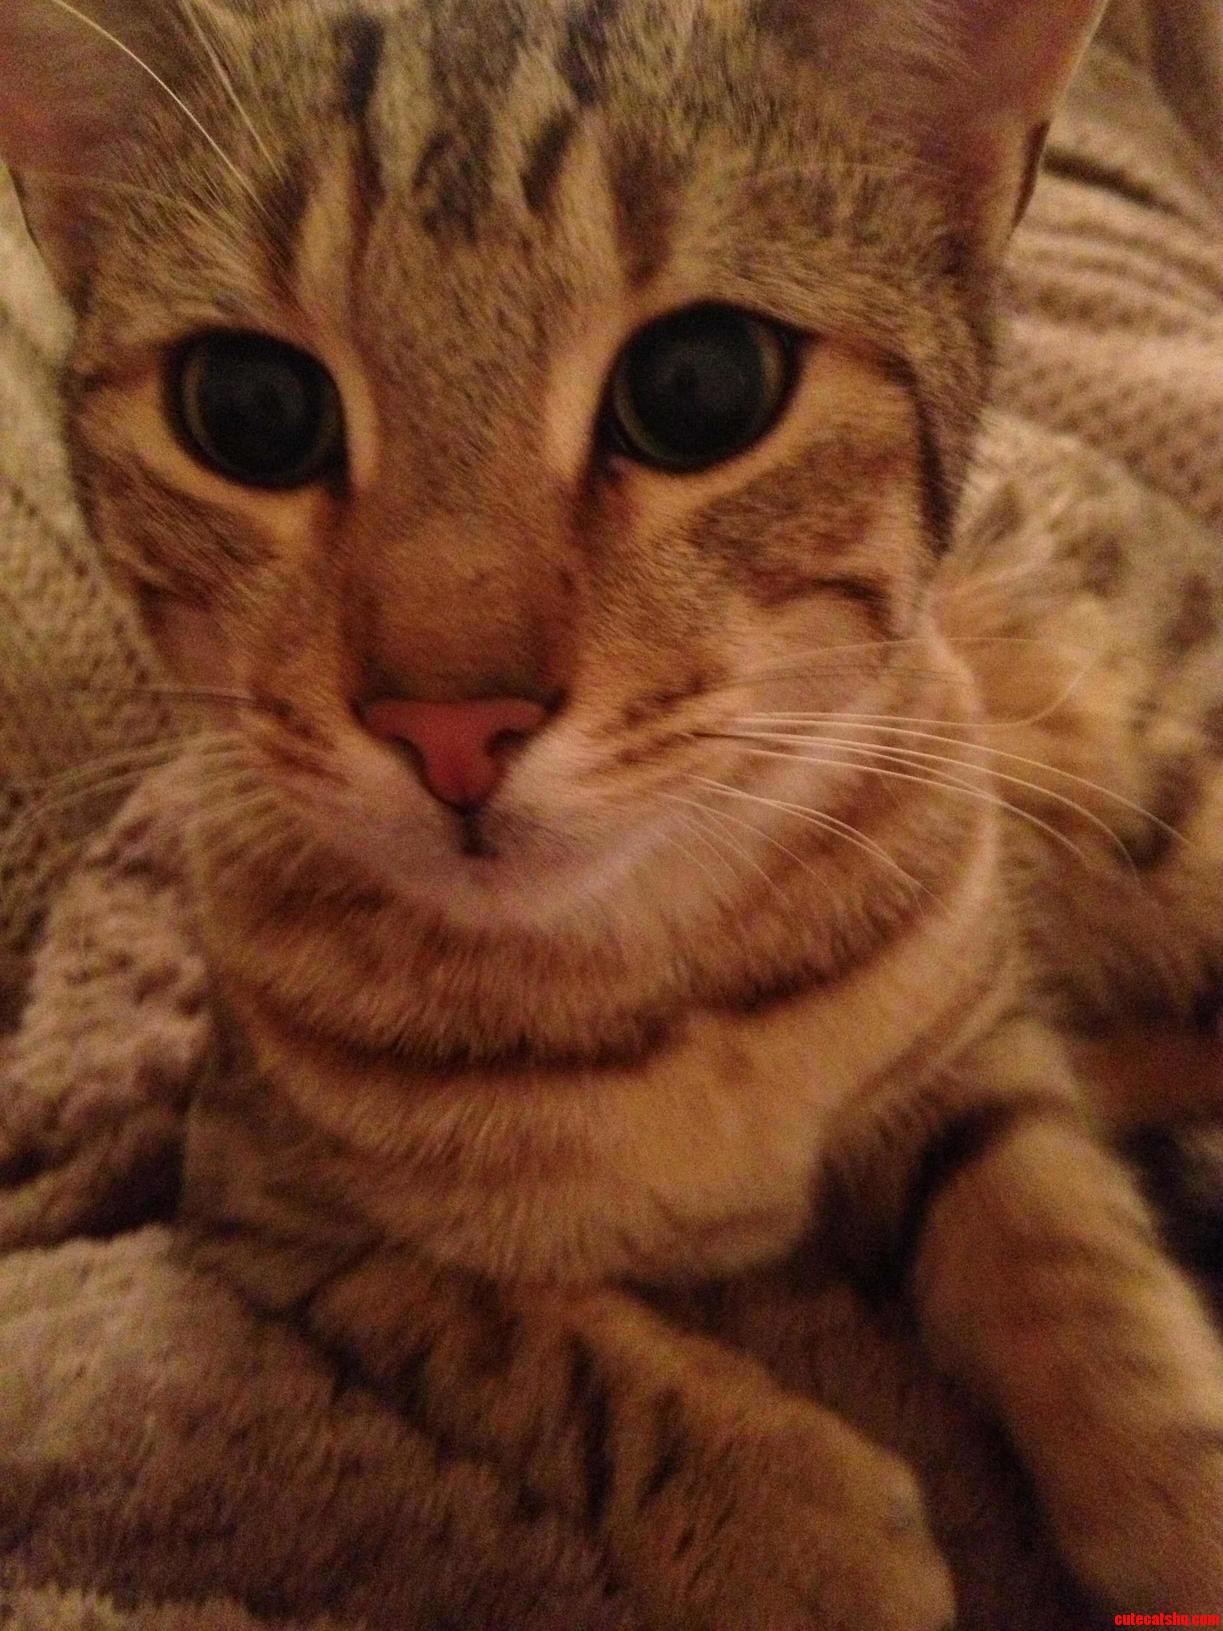 My Bengal Loves Attention. I Wake Up To This Face Most Mornings.